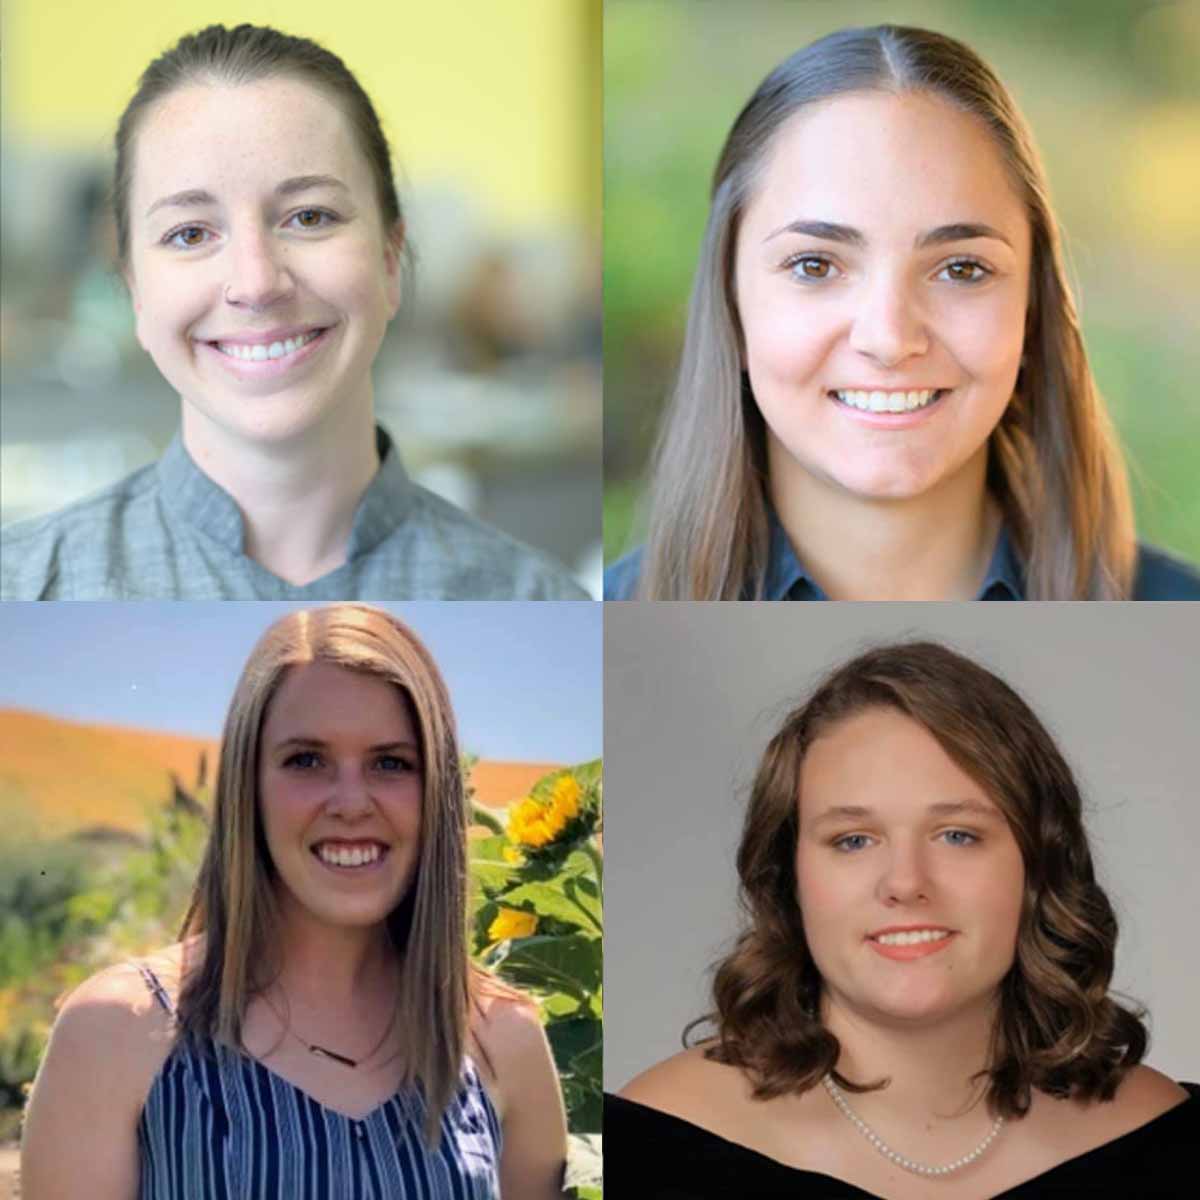 FCS honored several students with outstanding student awards: Beth Ropski, outstanding graduate teaching assistant; Brittney Anderson, outstanding senior; Sarah Michaels, outstanding junior; Kaylee Flodin, outstanding sophomore.